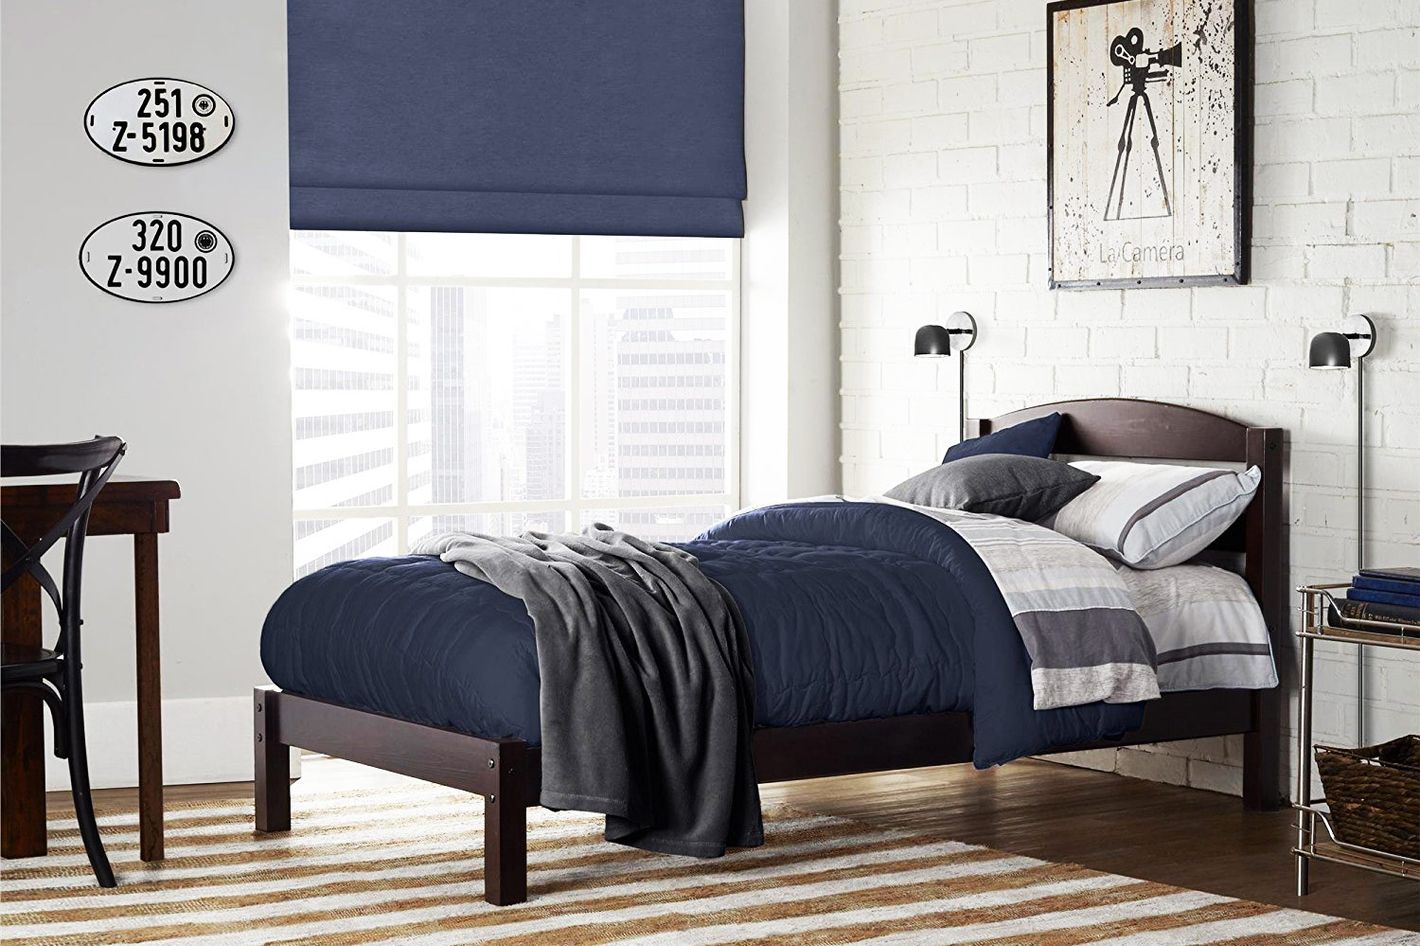 12 Best Twin Beds For Kids 2019, Twin Bed Headboards